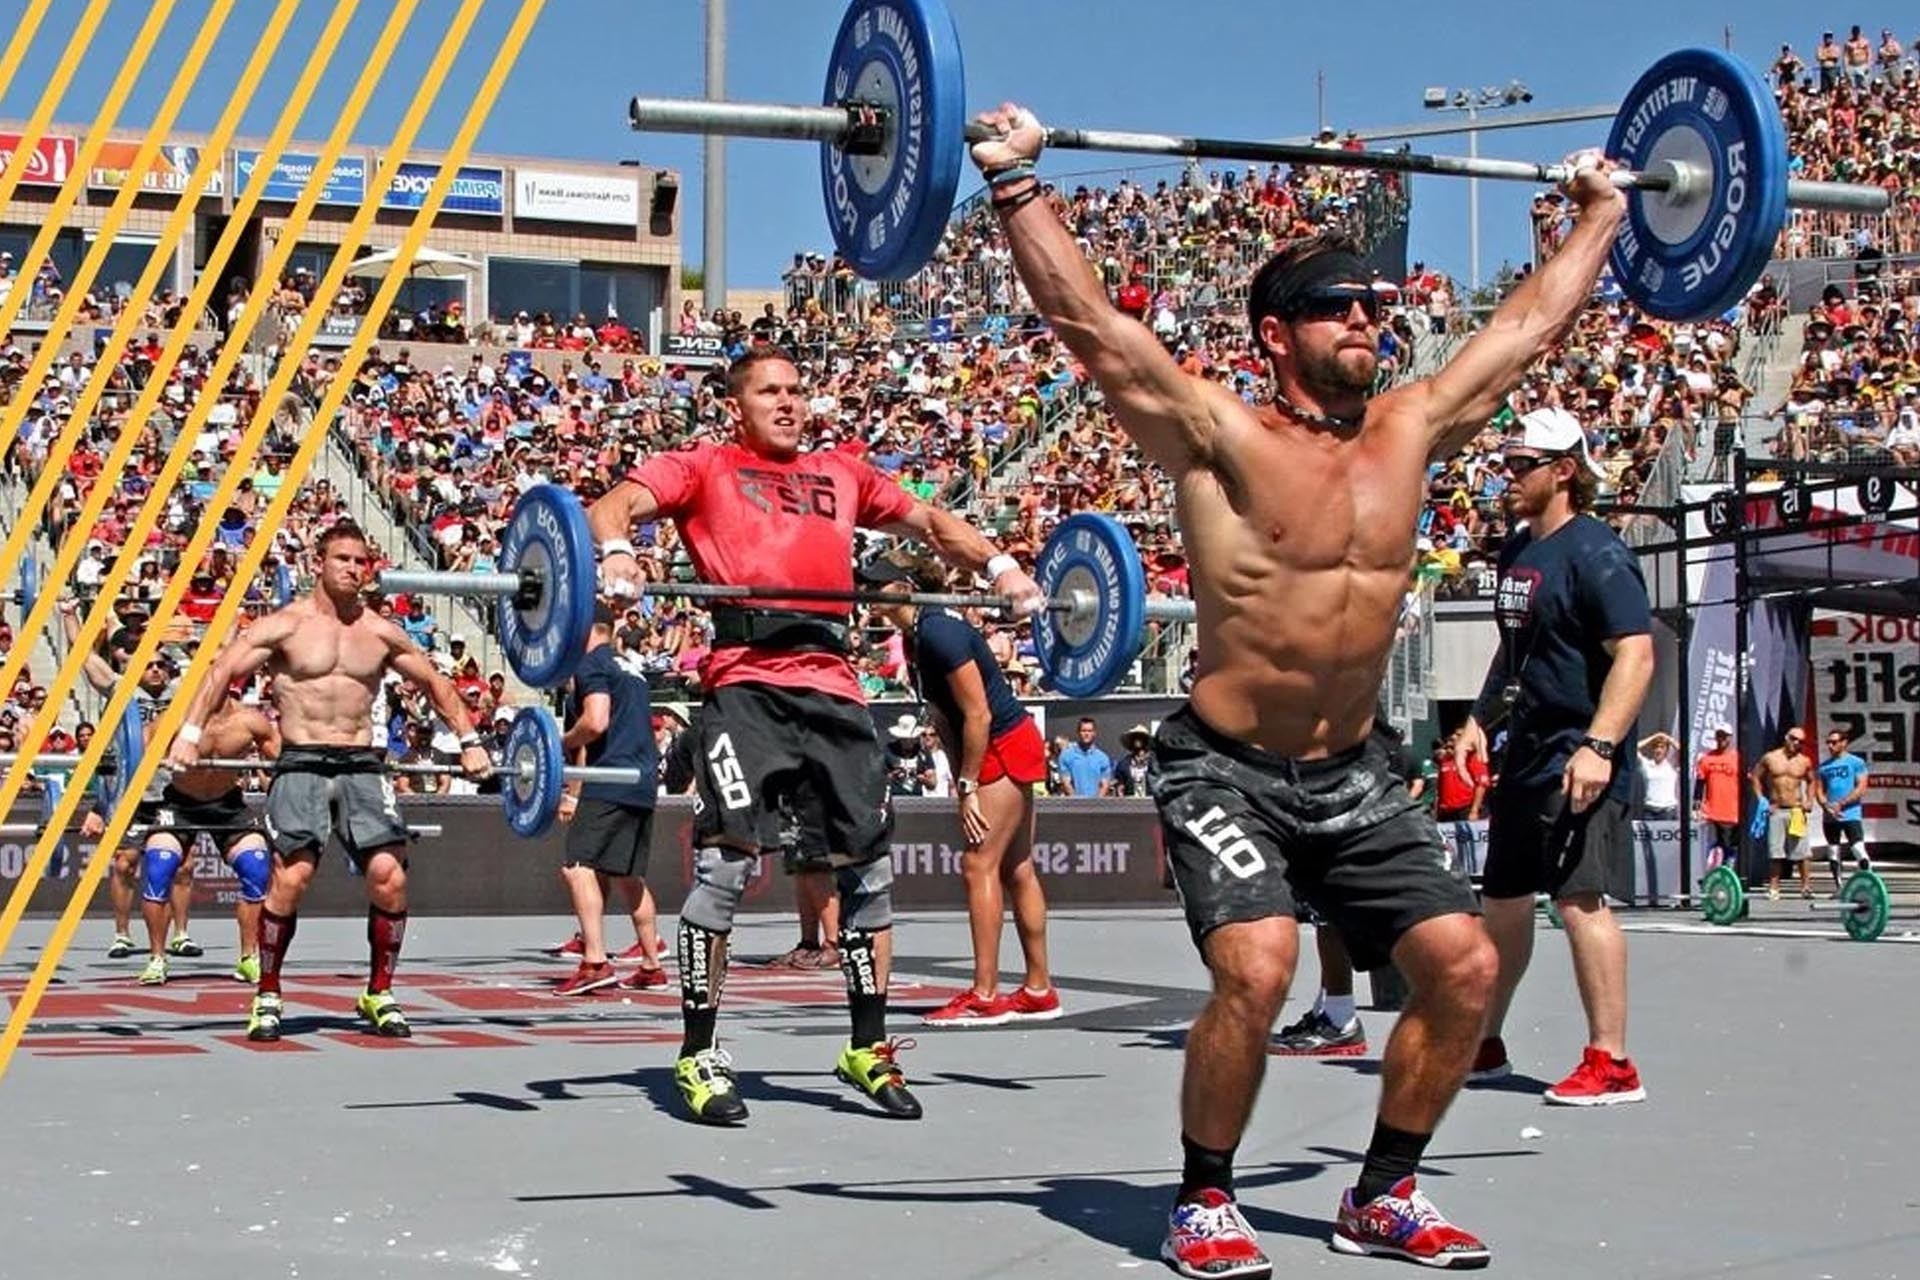 Everything You Need To Know About The 2019 CrossFit Games GQ